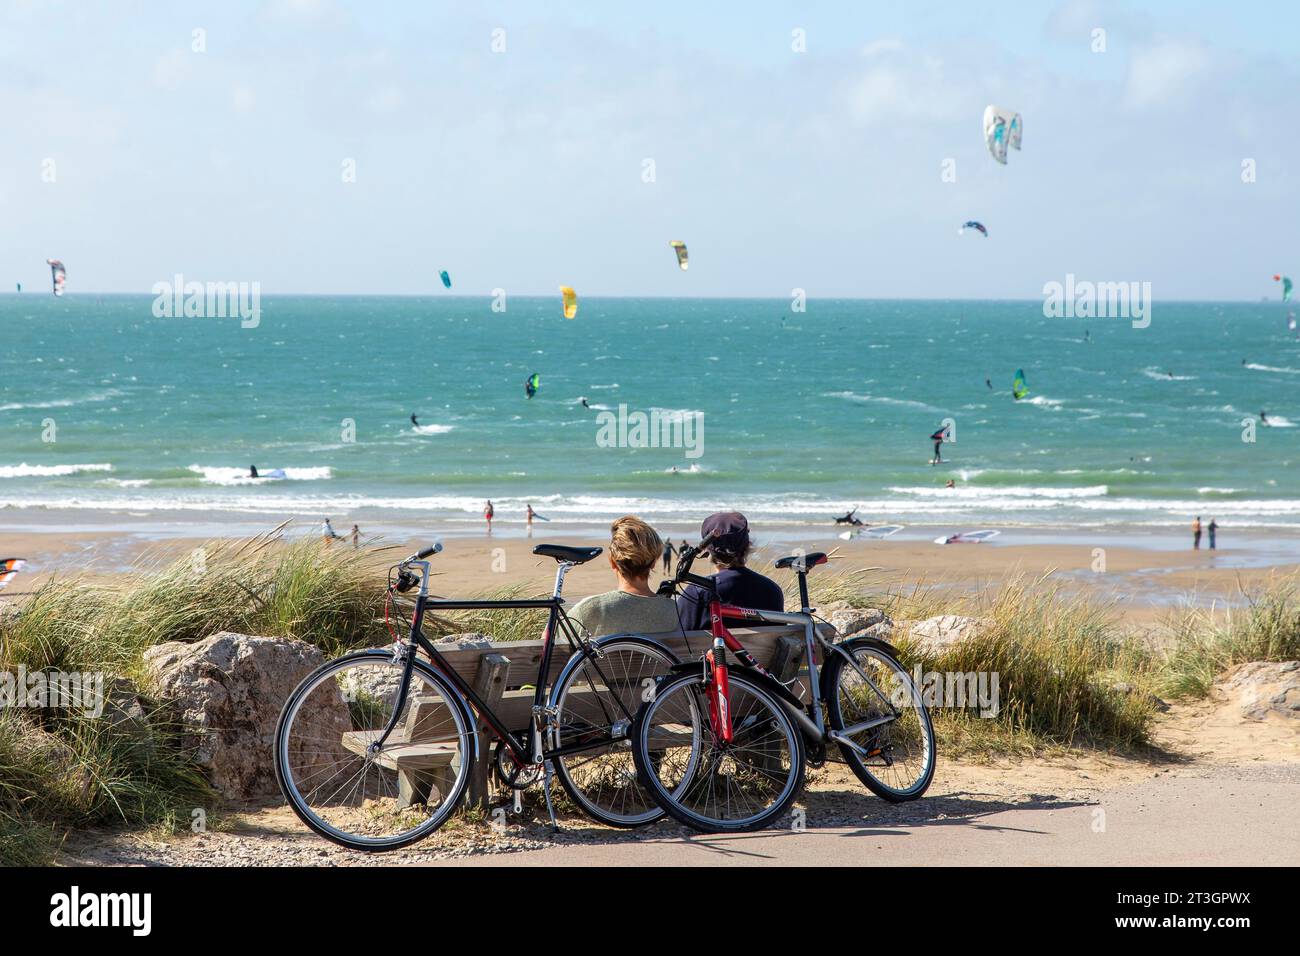 France, Pas de Calais, Wissant, couple watching kitesurfing on the water Stock Photo